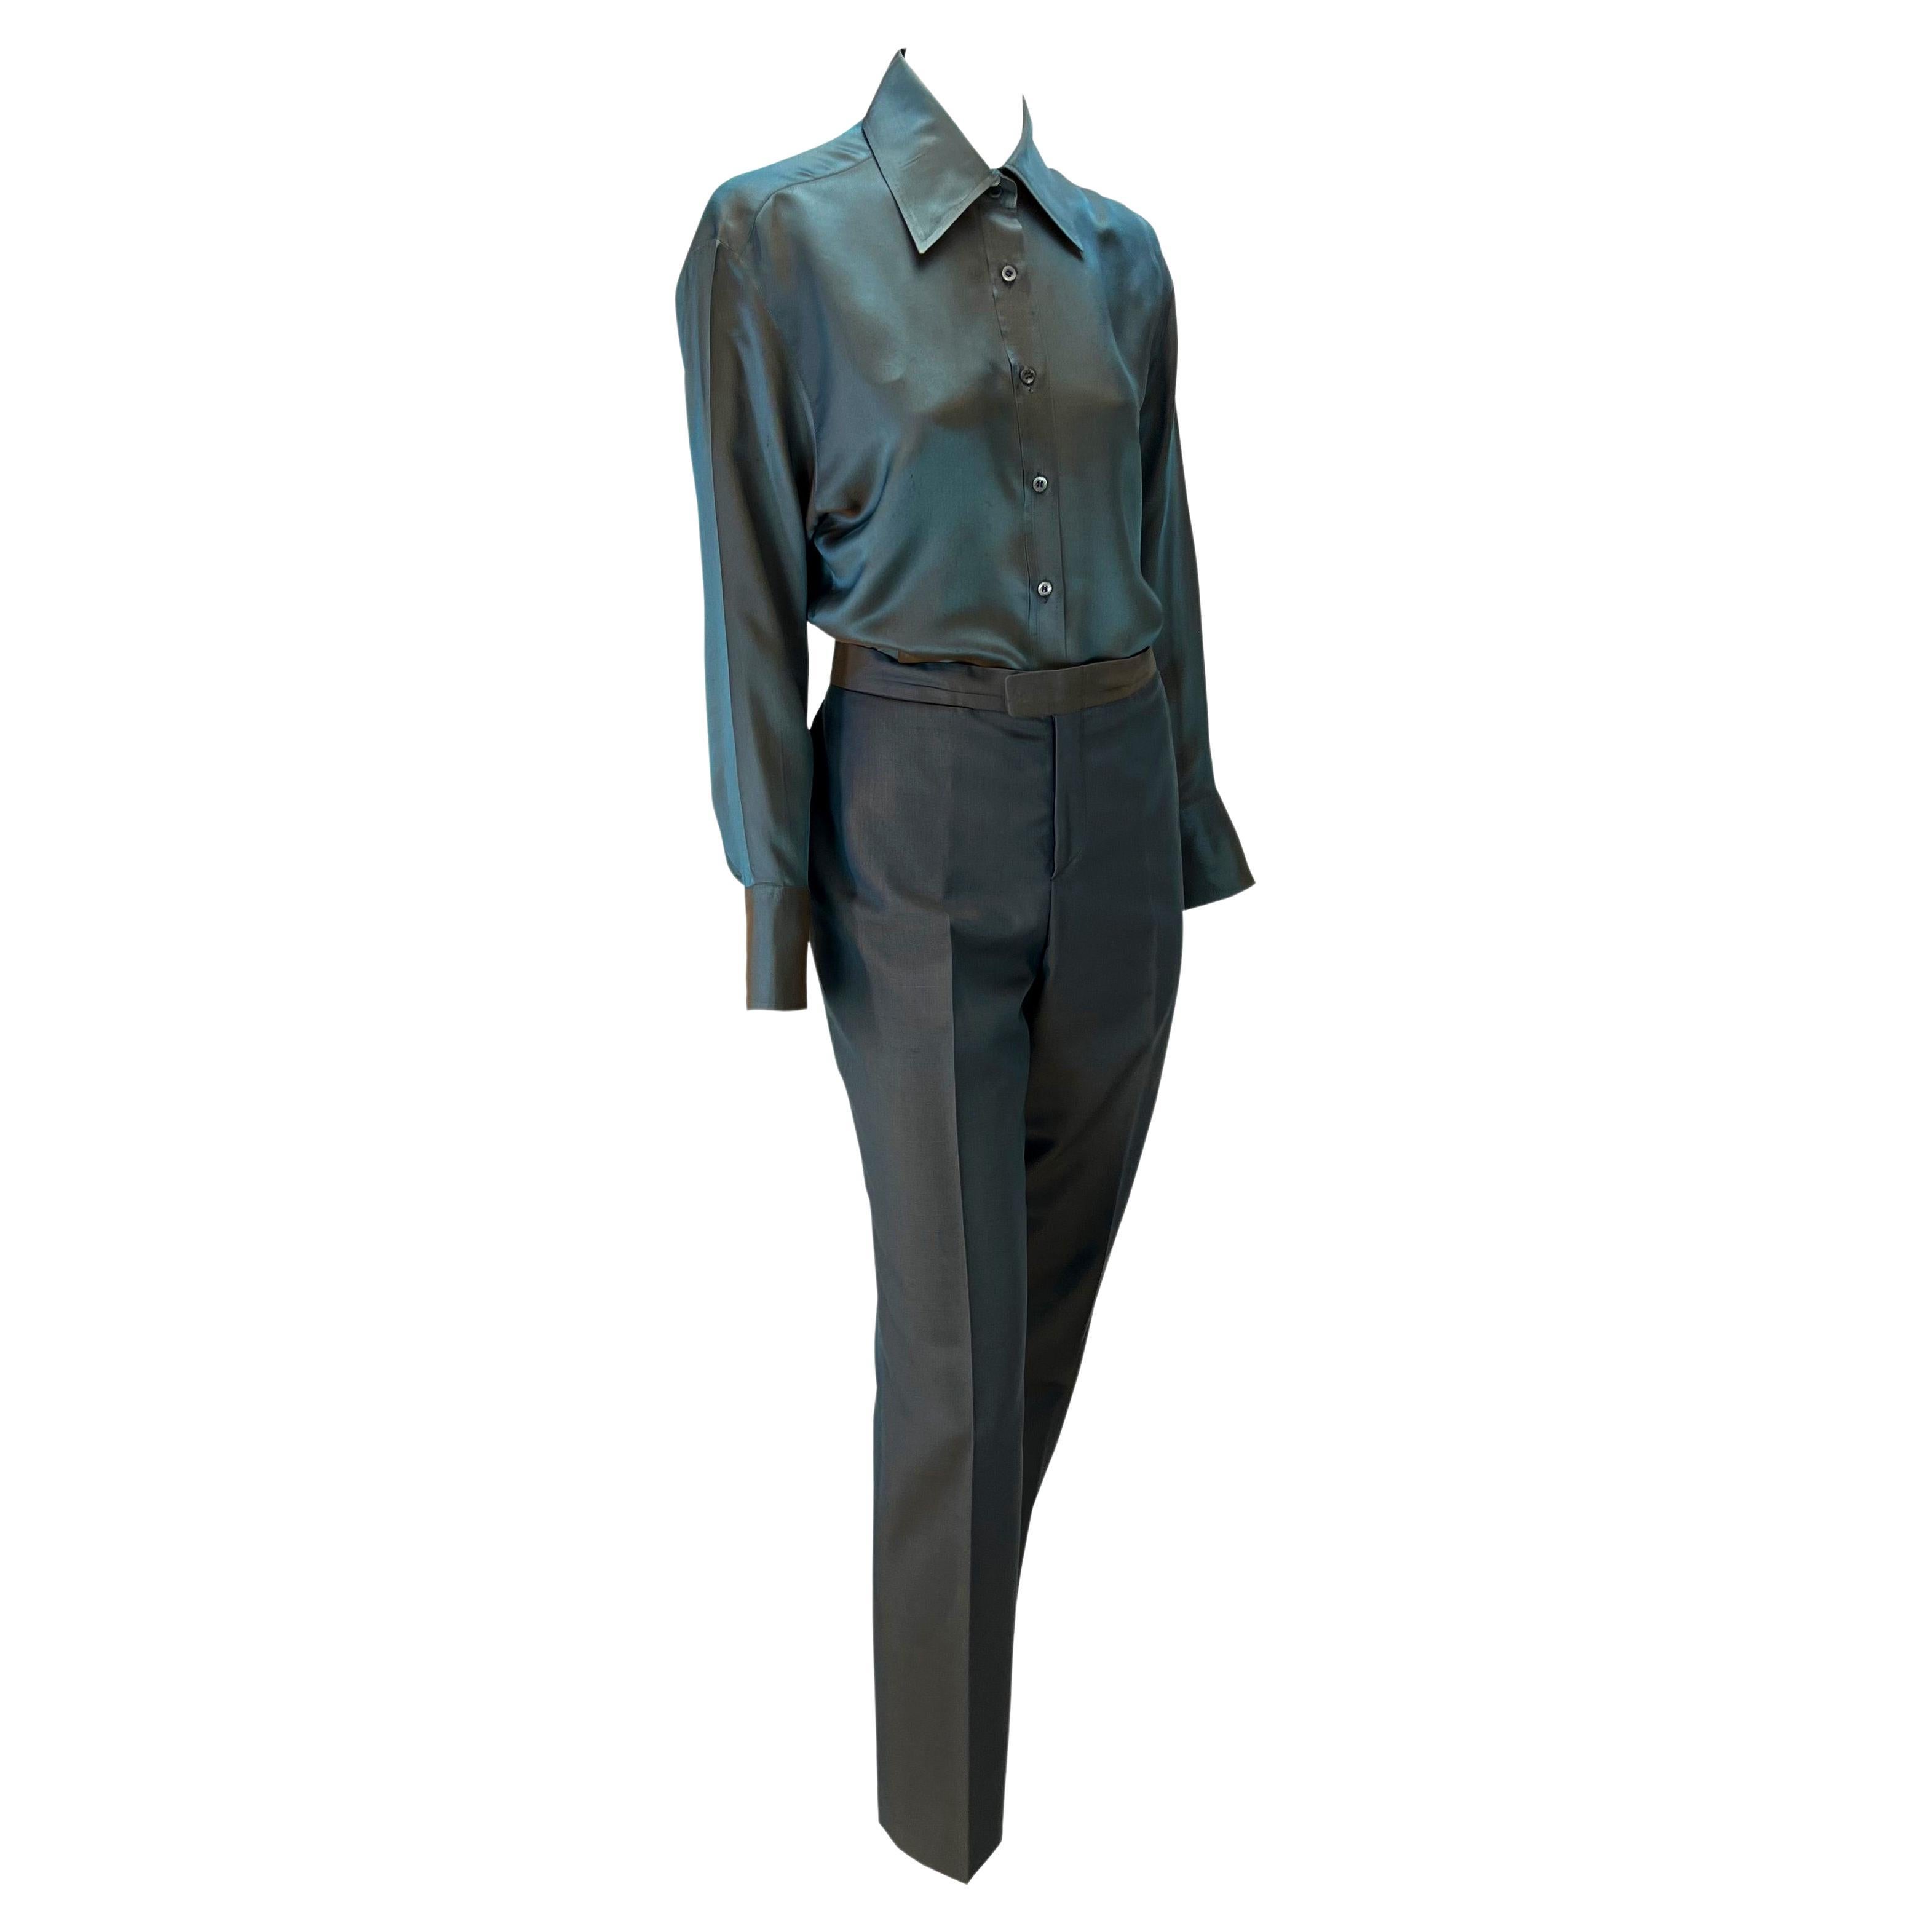 S/S 1998 Gucci by Tom Ford Runway Iridescent Satin Grey Rust Button Up Pant Set For Sale 3